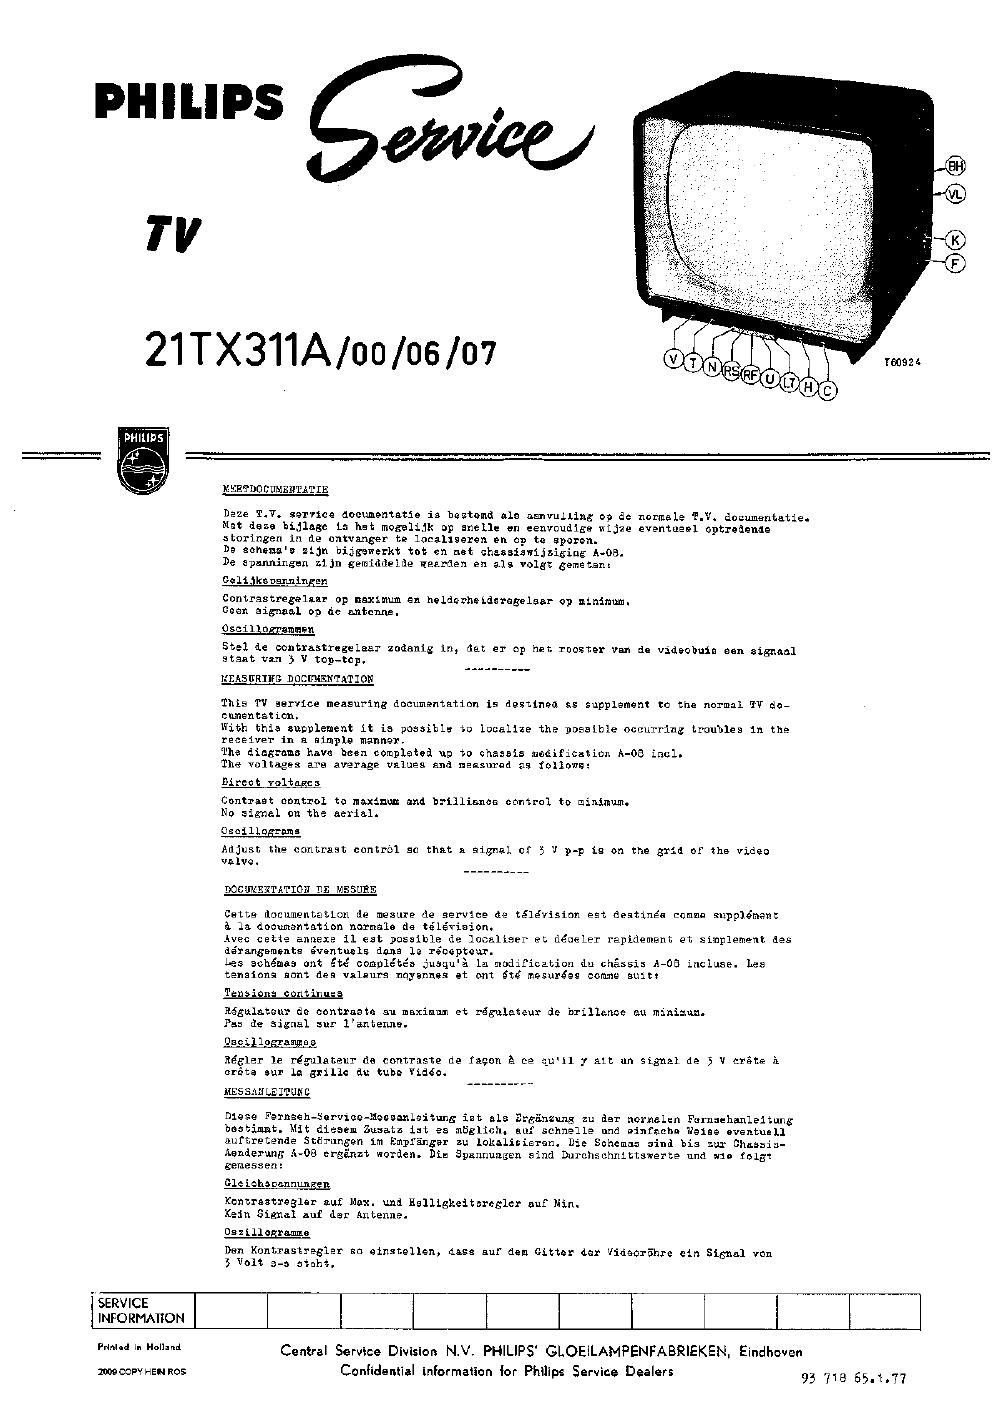 philips 21 tx 311 a service manual